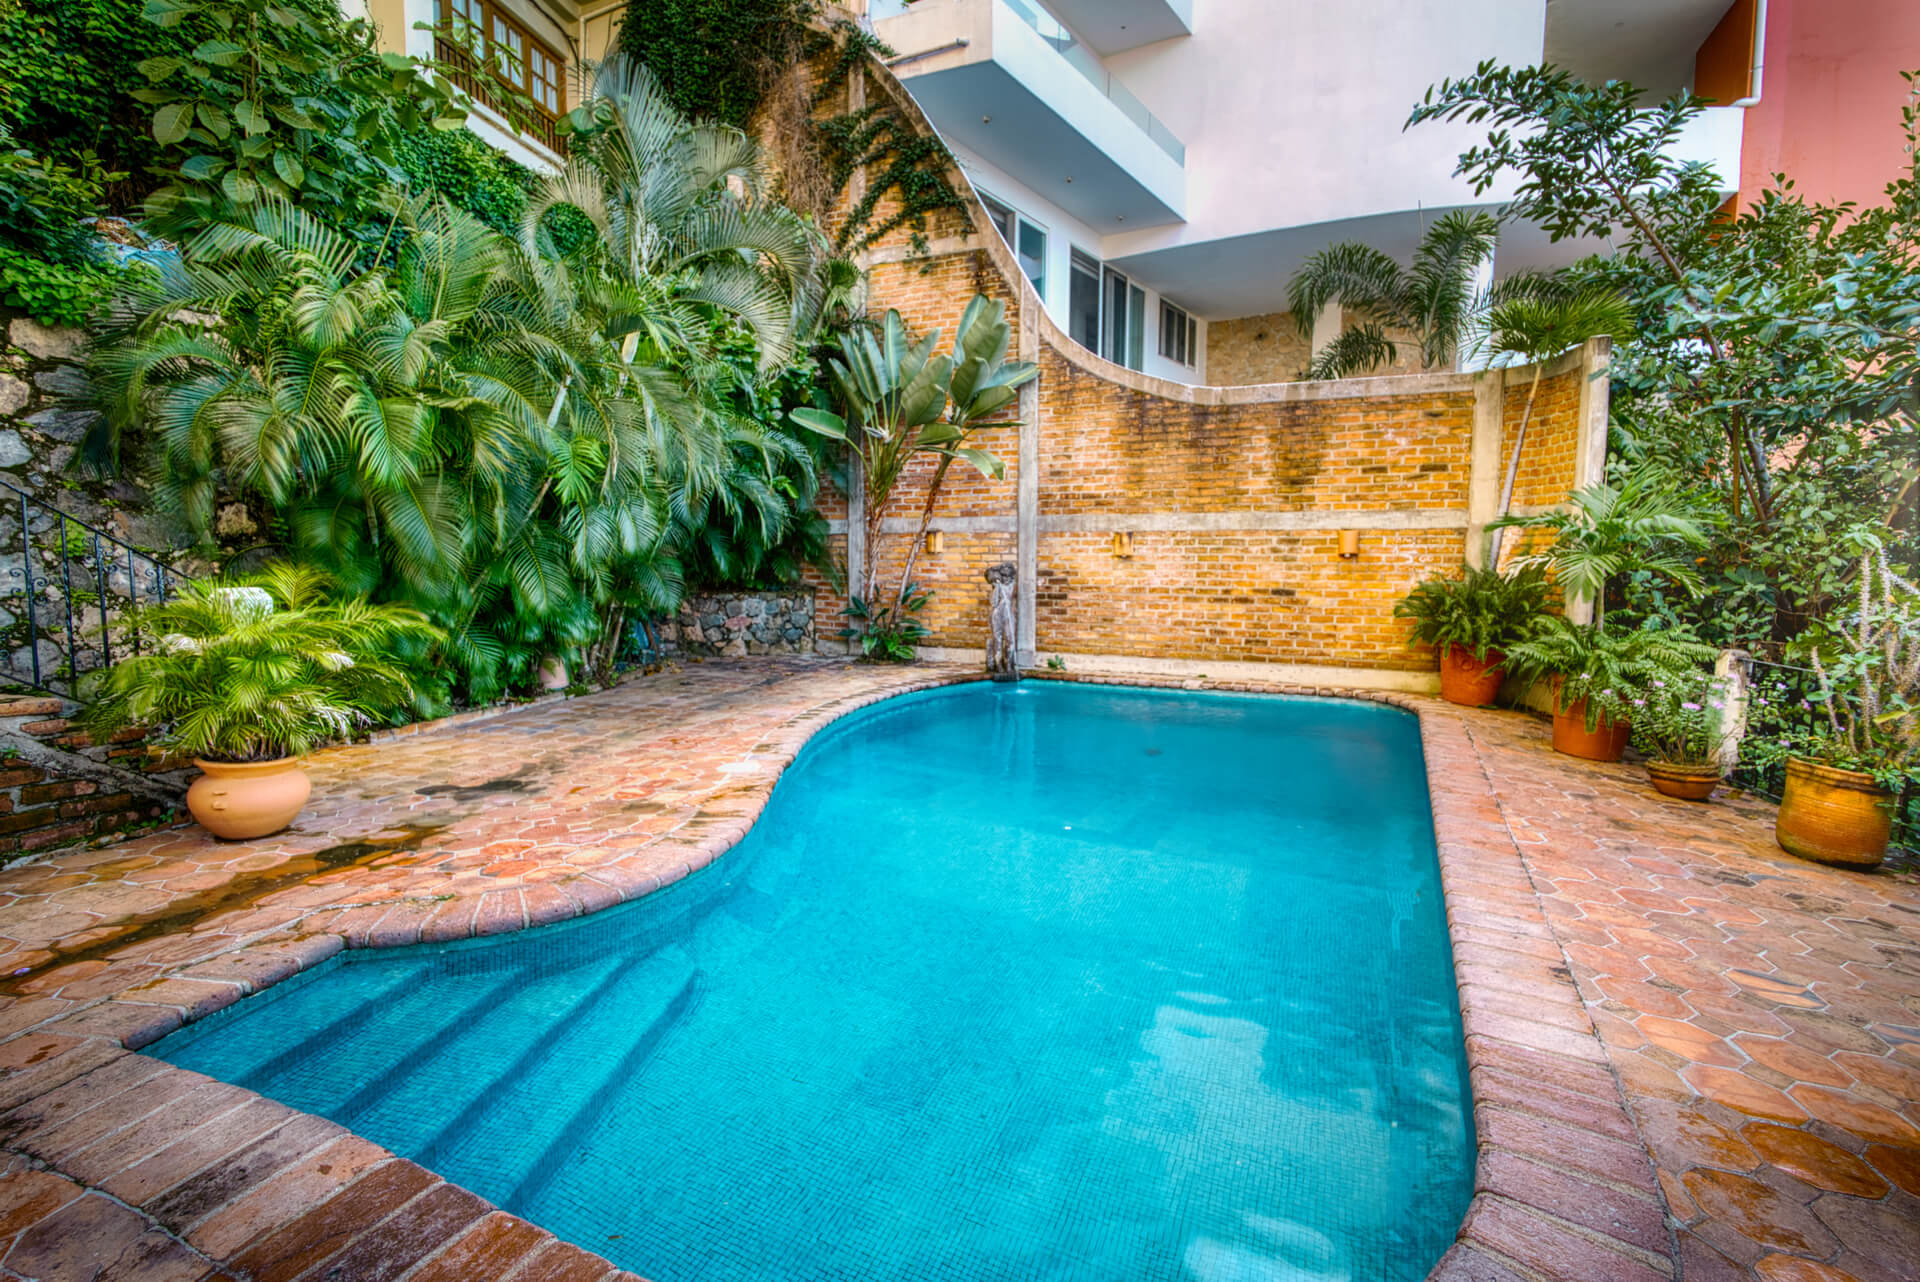 condo pool surrounded by lush plants